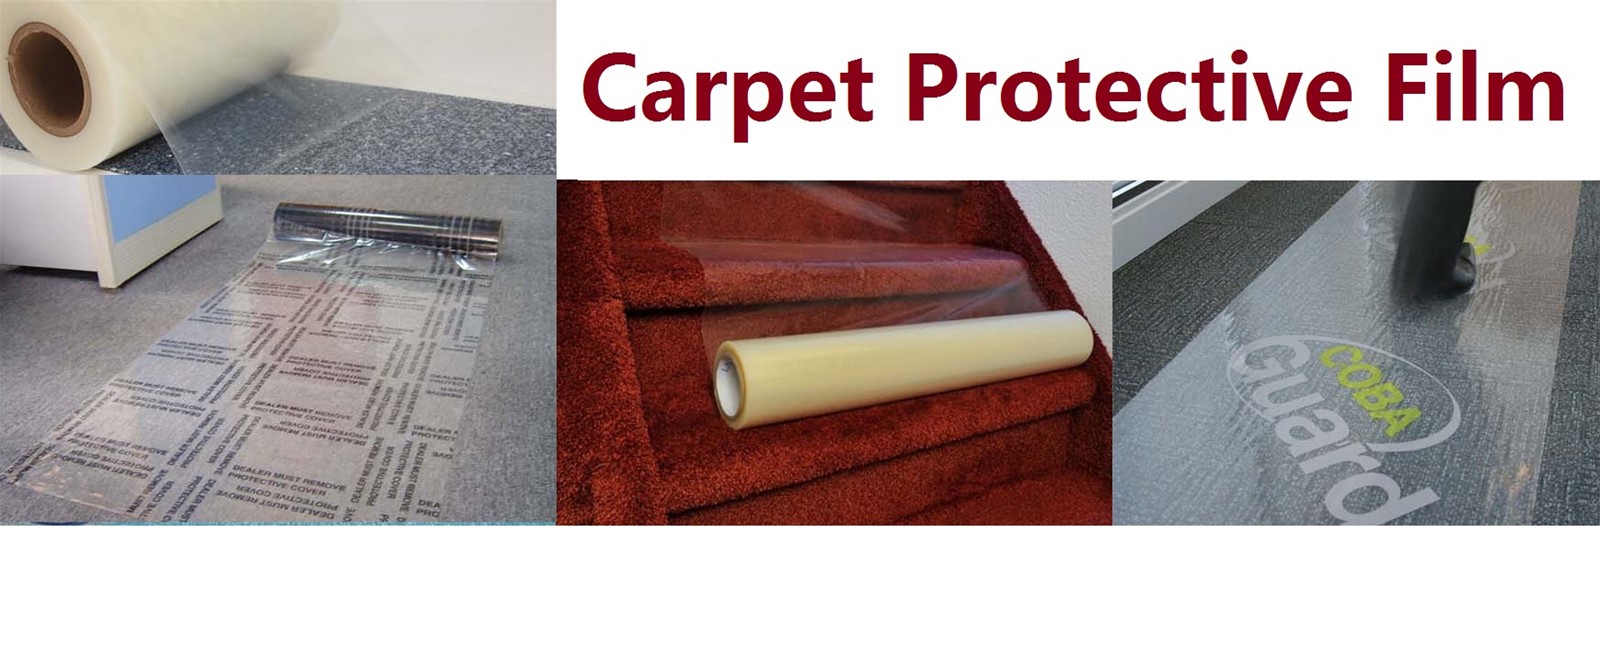 Carpets and Textiles protective film